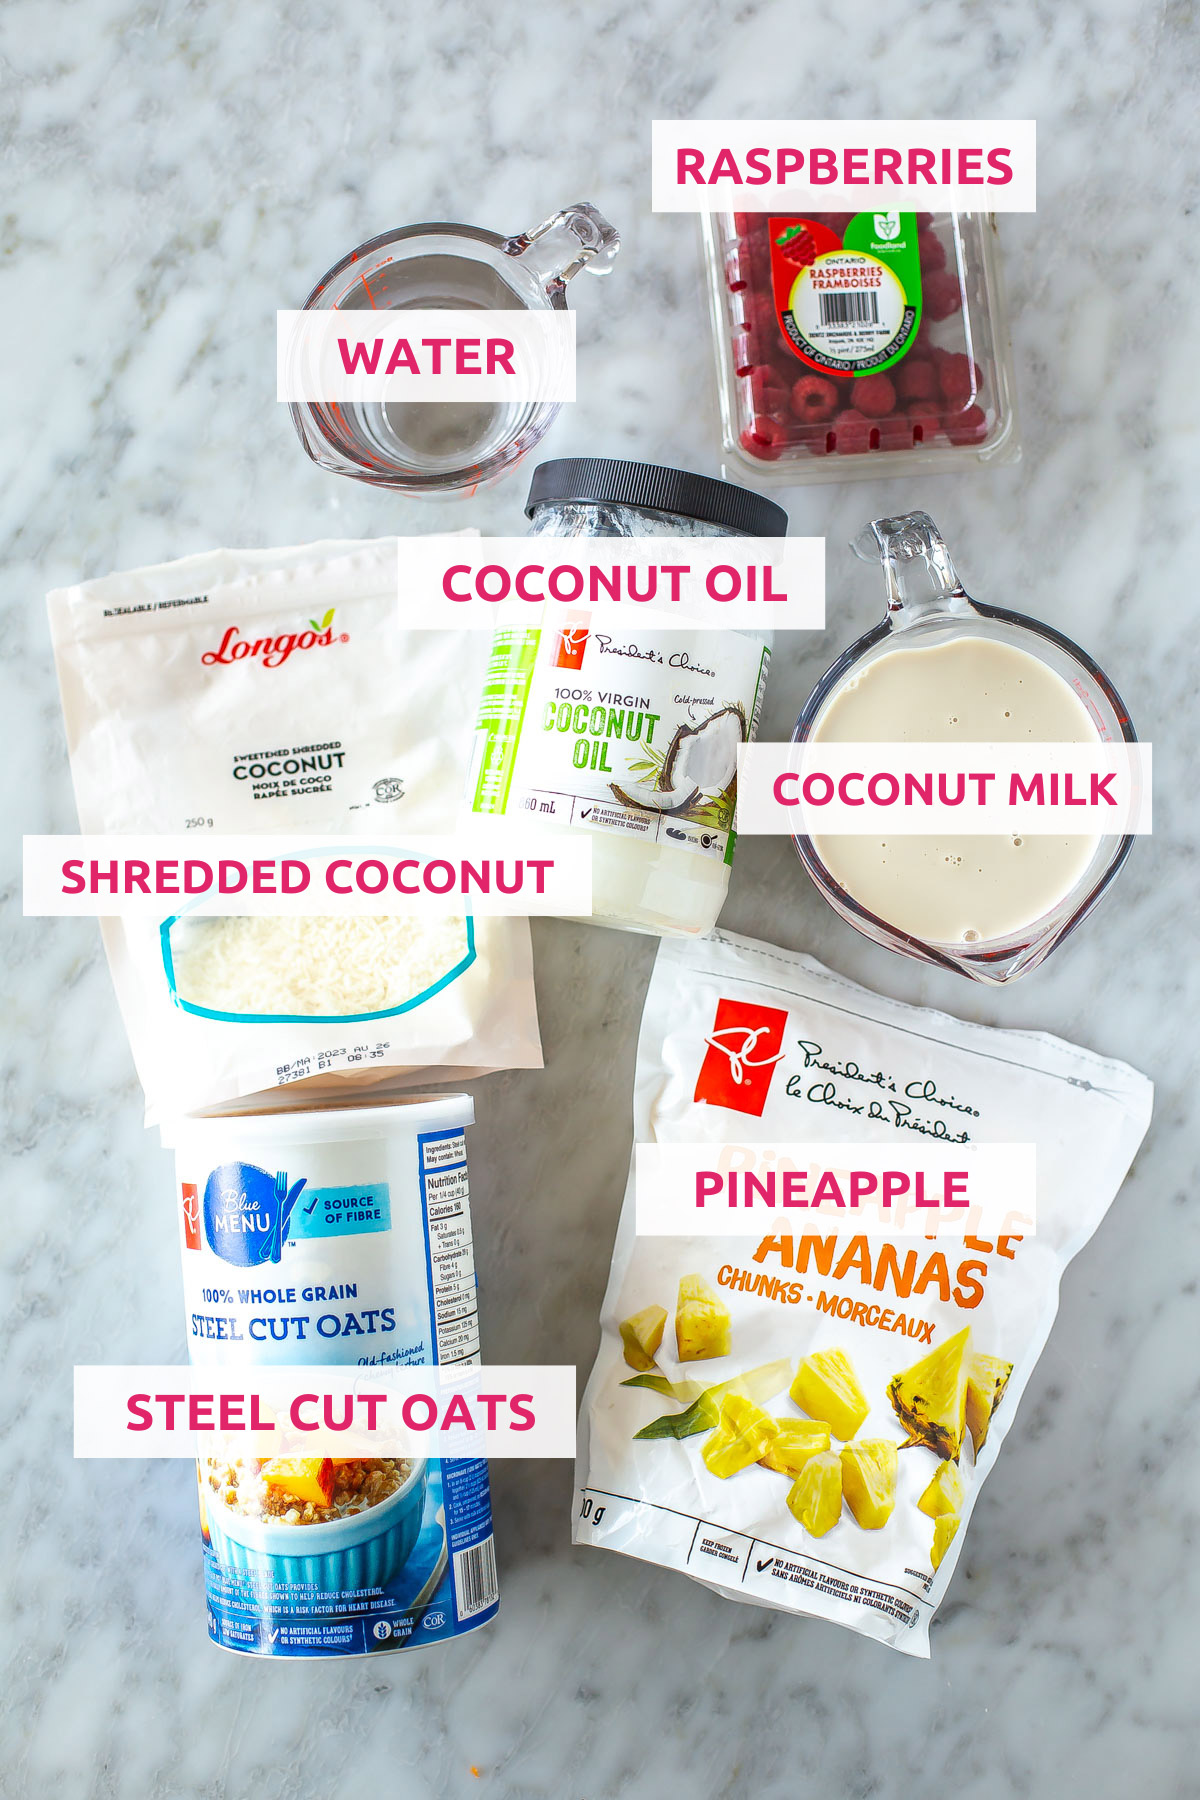 Ingredients for pina colada steel cut oats: steel cut oats, shredded coconut, pineapple, raspberries, coconut milk, coconut oil and water.